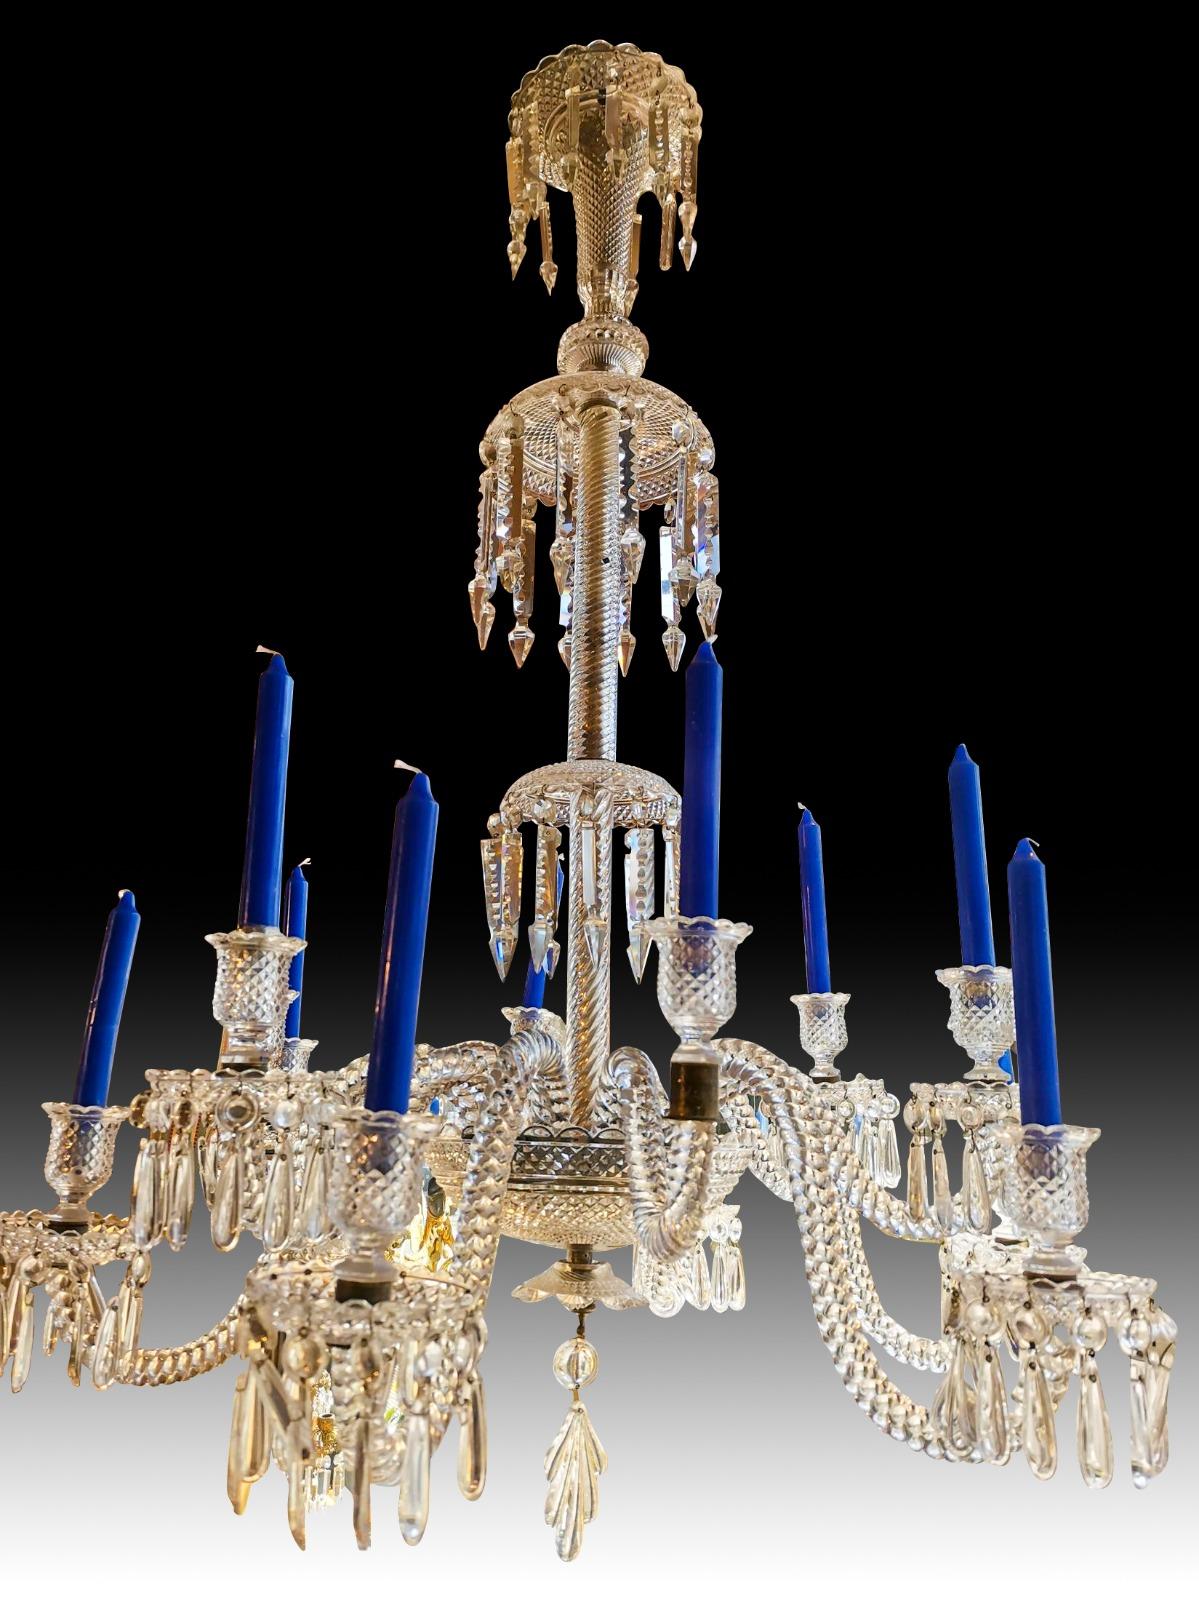 20th Century Crystal Chandelier Baccarat with 12 Arms Finely Decorated with Pearls, 19th Cen For Sale